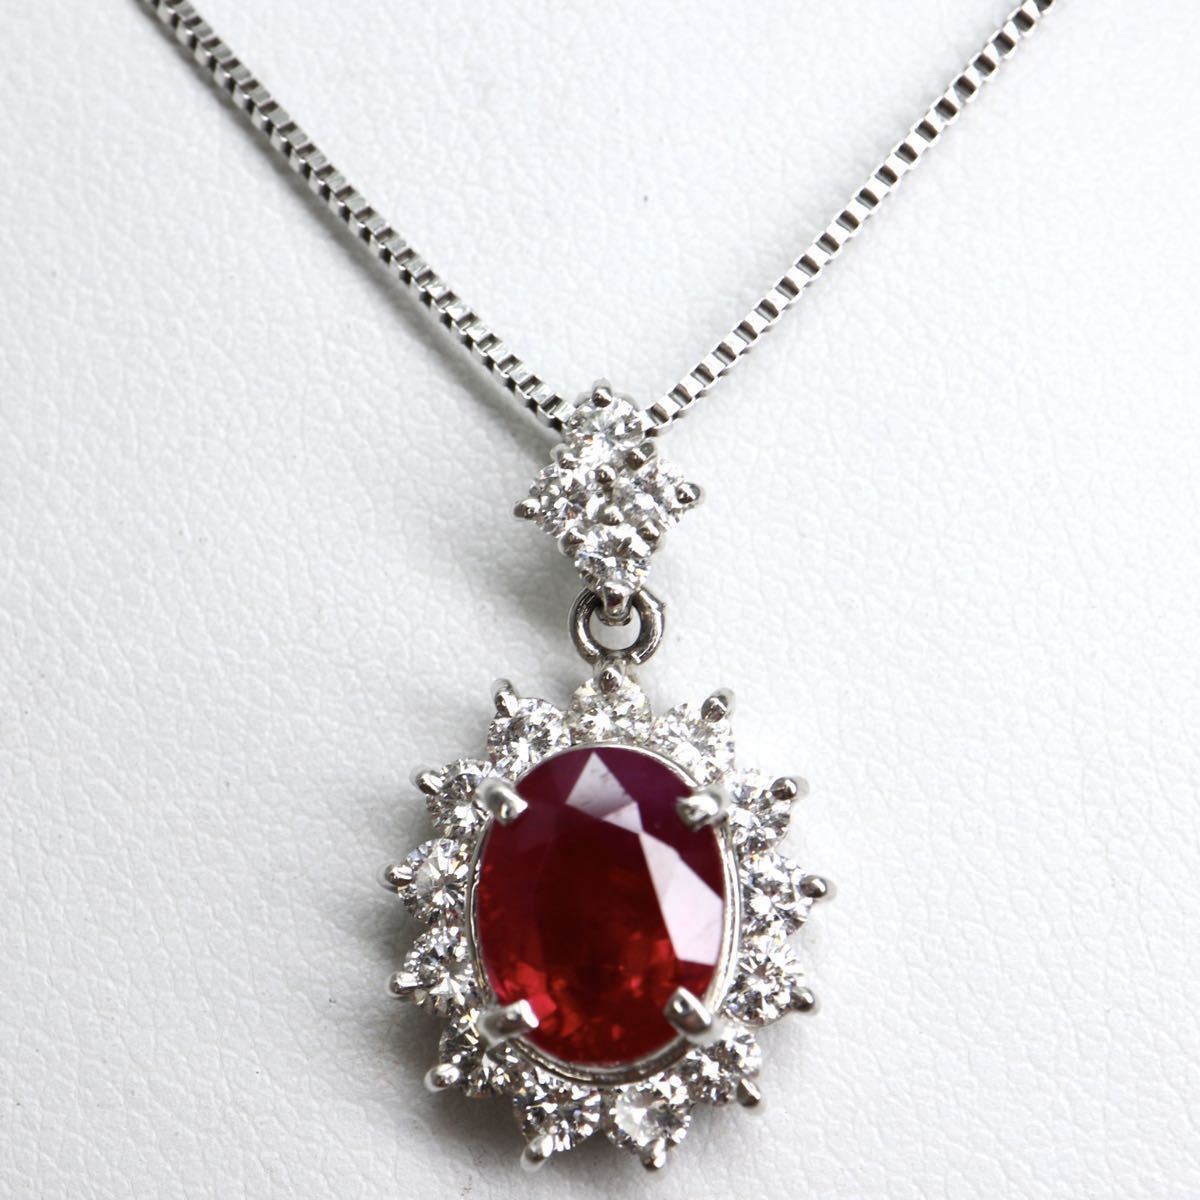 2.0ctUP☆〈天然ルビー/ダイヤモンドネックレス〉m 2.07ct D0.71ct PT900/850 43.5cm 6.5g ruby jewelry necklace ジュエリー EG1/FB1